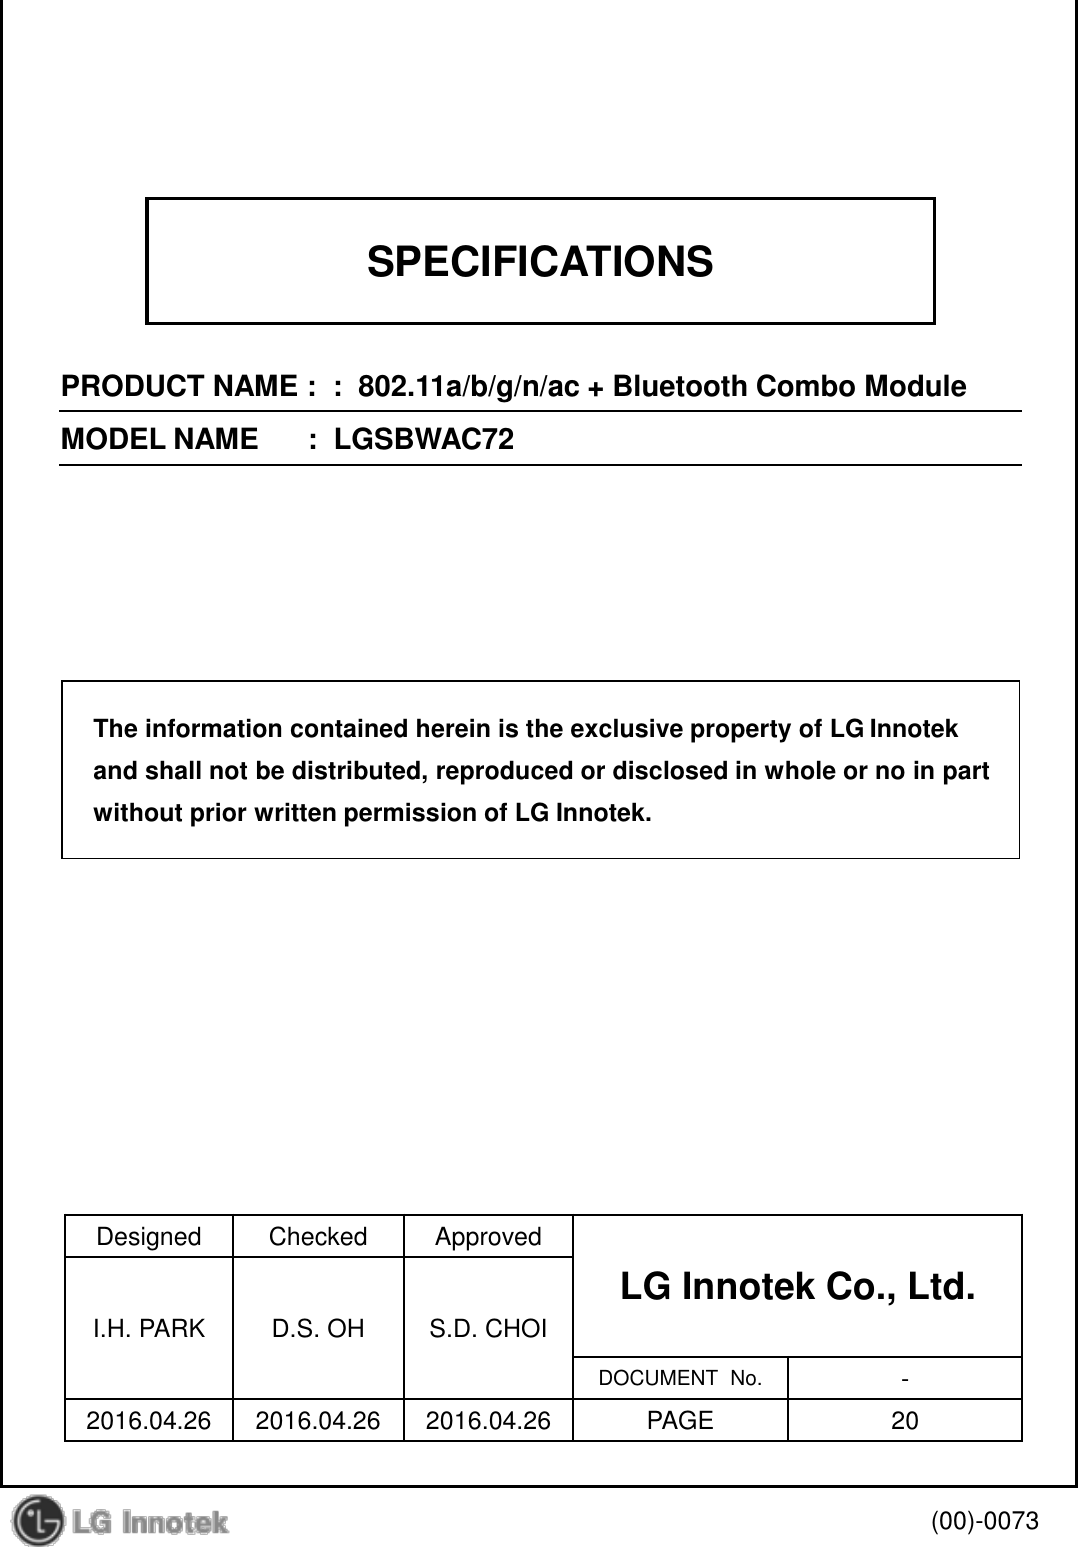 SPECIFICATIONSPRODUCT NAME :  :  802.11a/b/g/n/ac + Bluetooth Combo ModuleMODEL NAME      :  LGSBWAC72Designed Checked ApprovedLG Innotek Co., Ltd.   I.H. PARK D.S. OH S.D. CHOIDOCUMENT  No. -2016.04.26 2016.04.26 2016.04.26 PAGE 20(00)-0073The information contained herein is the exclusive property of LG Innotekand shall not be distributed, reproduced or disclosed in whole or no in partwithout prior written permission of LG Innotek.